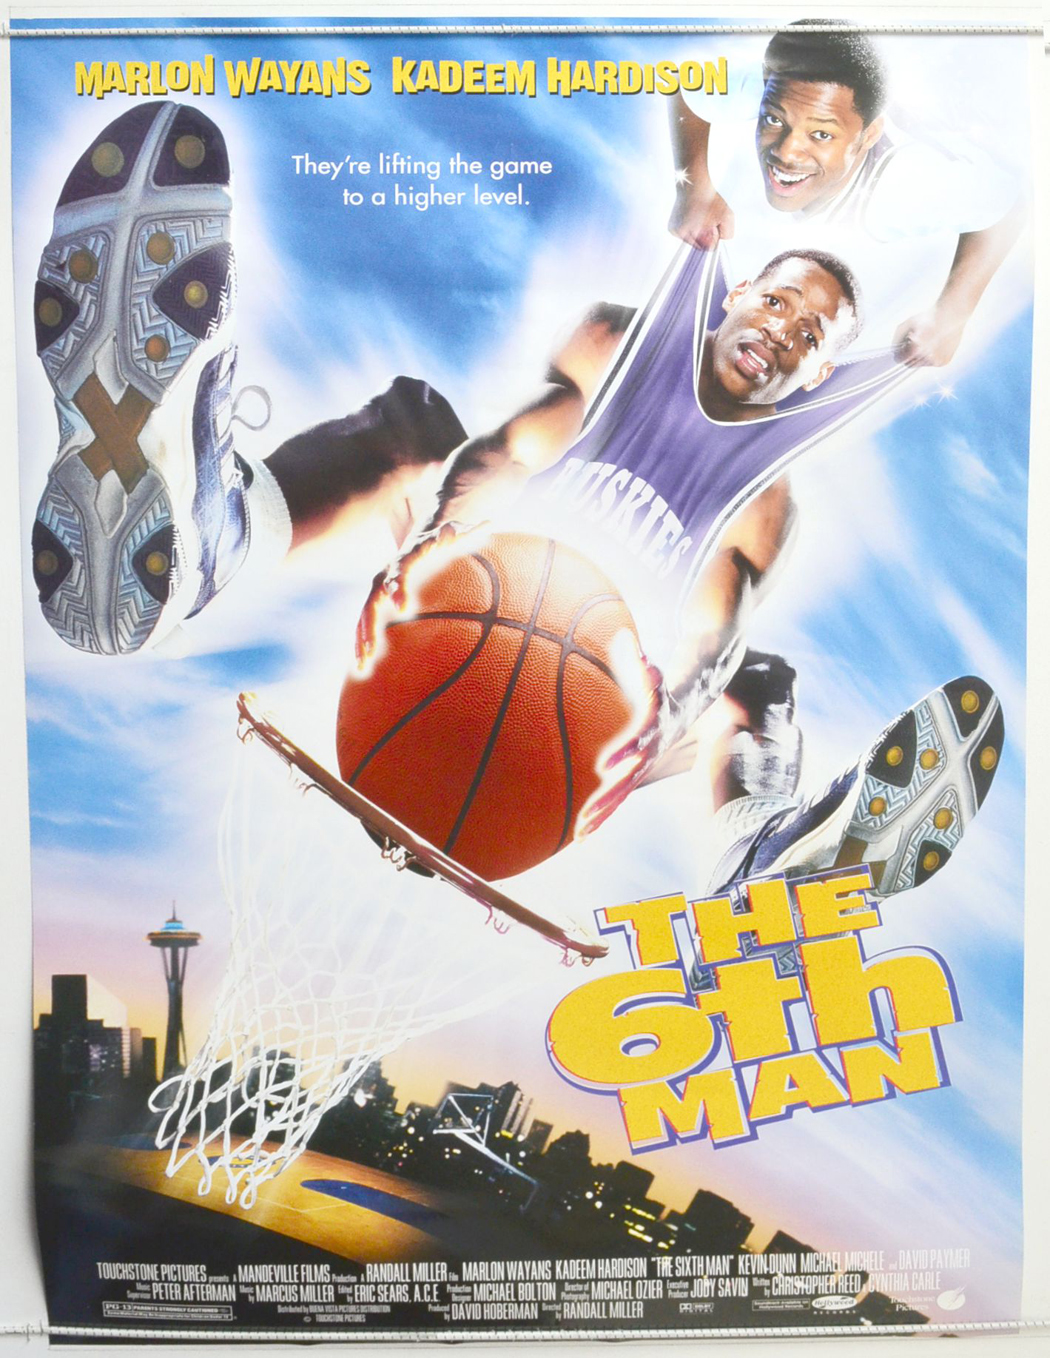 6th Man (The) - Original Cinema Movie Poster From ...